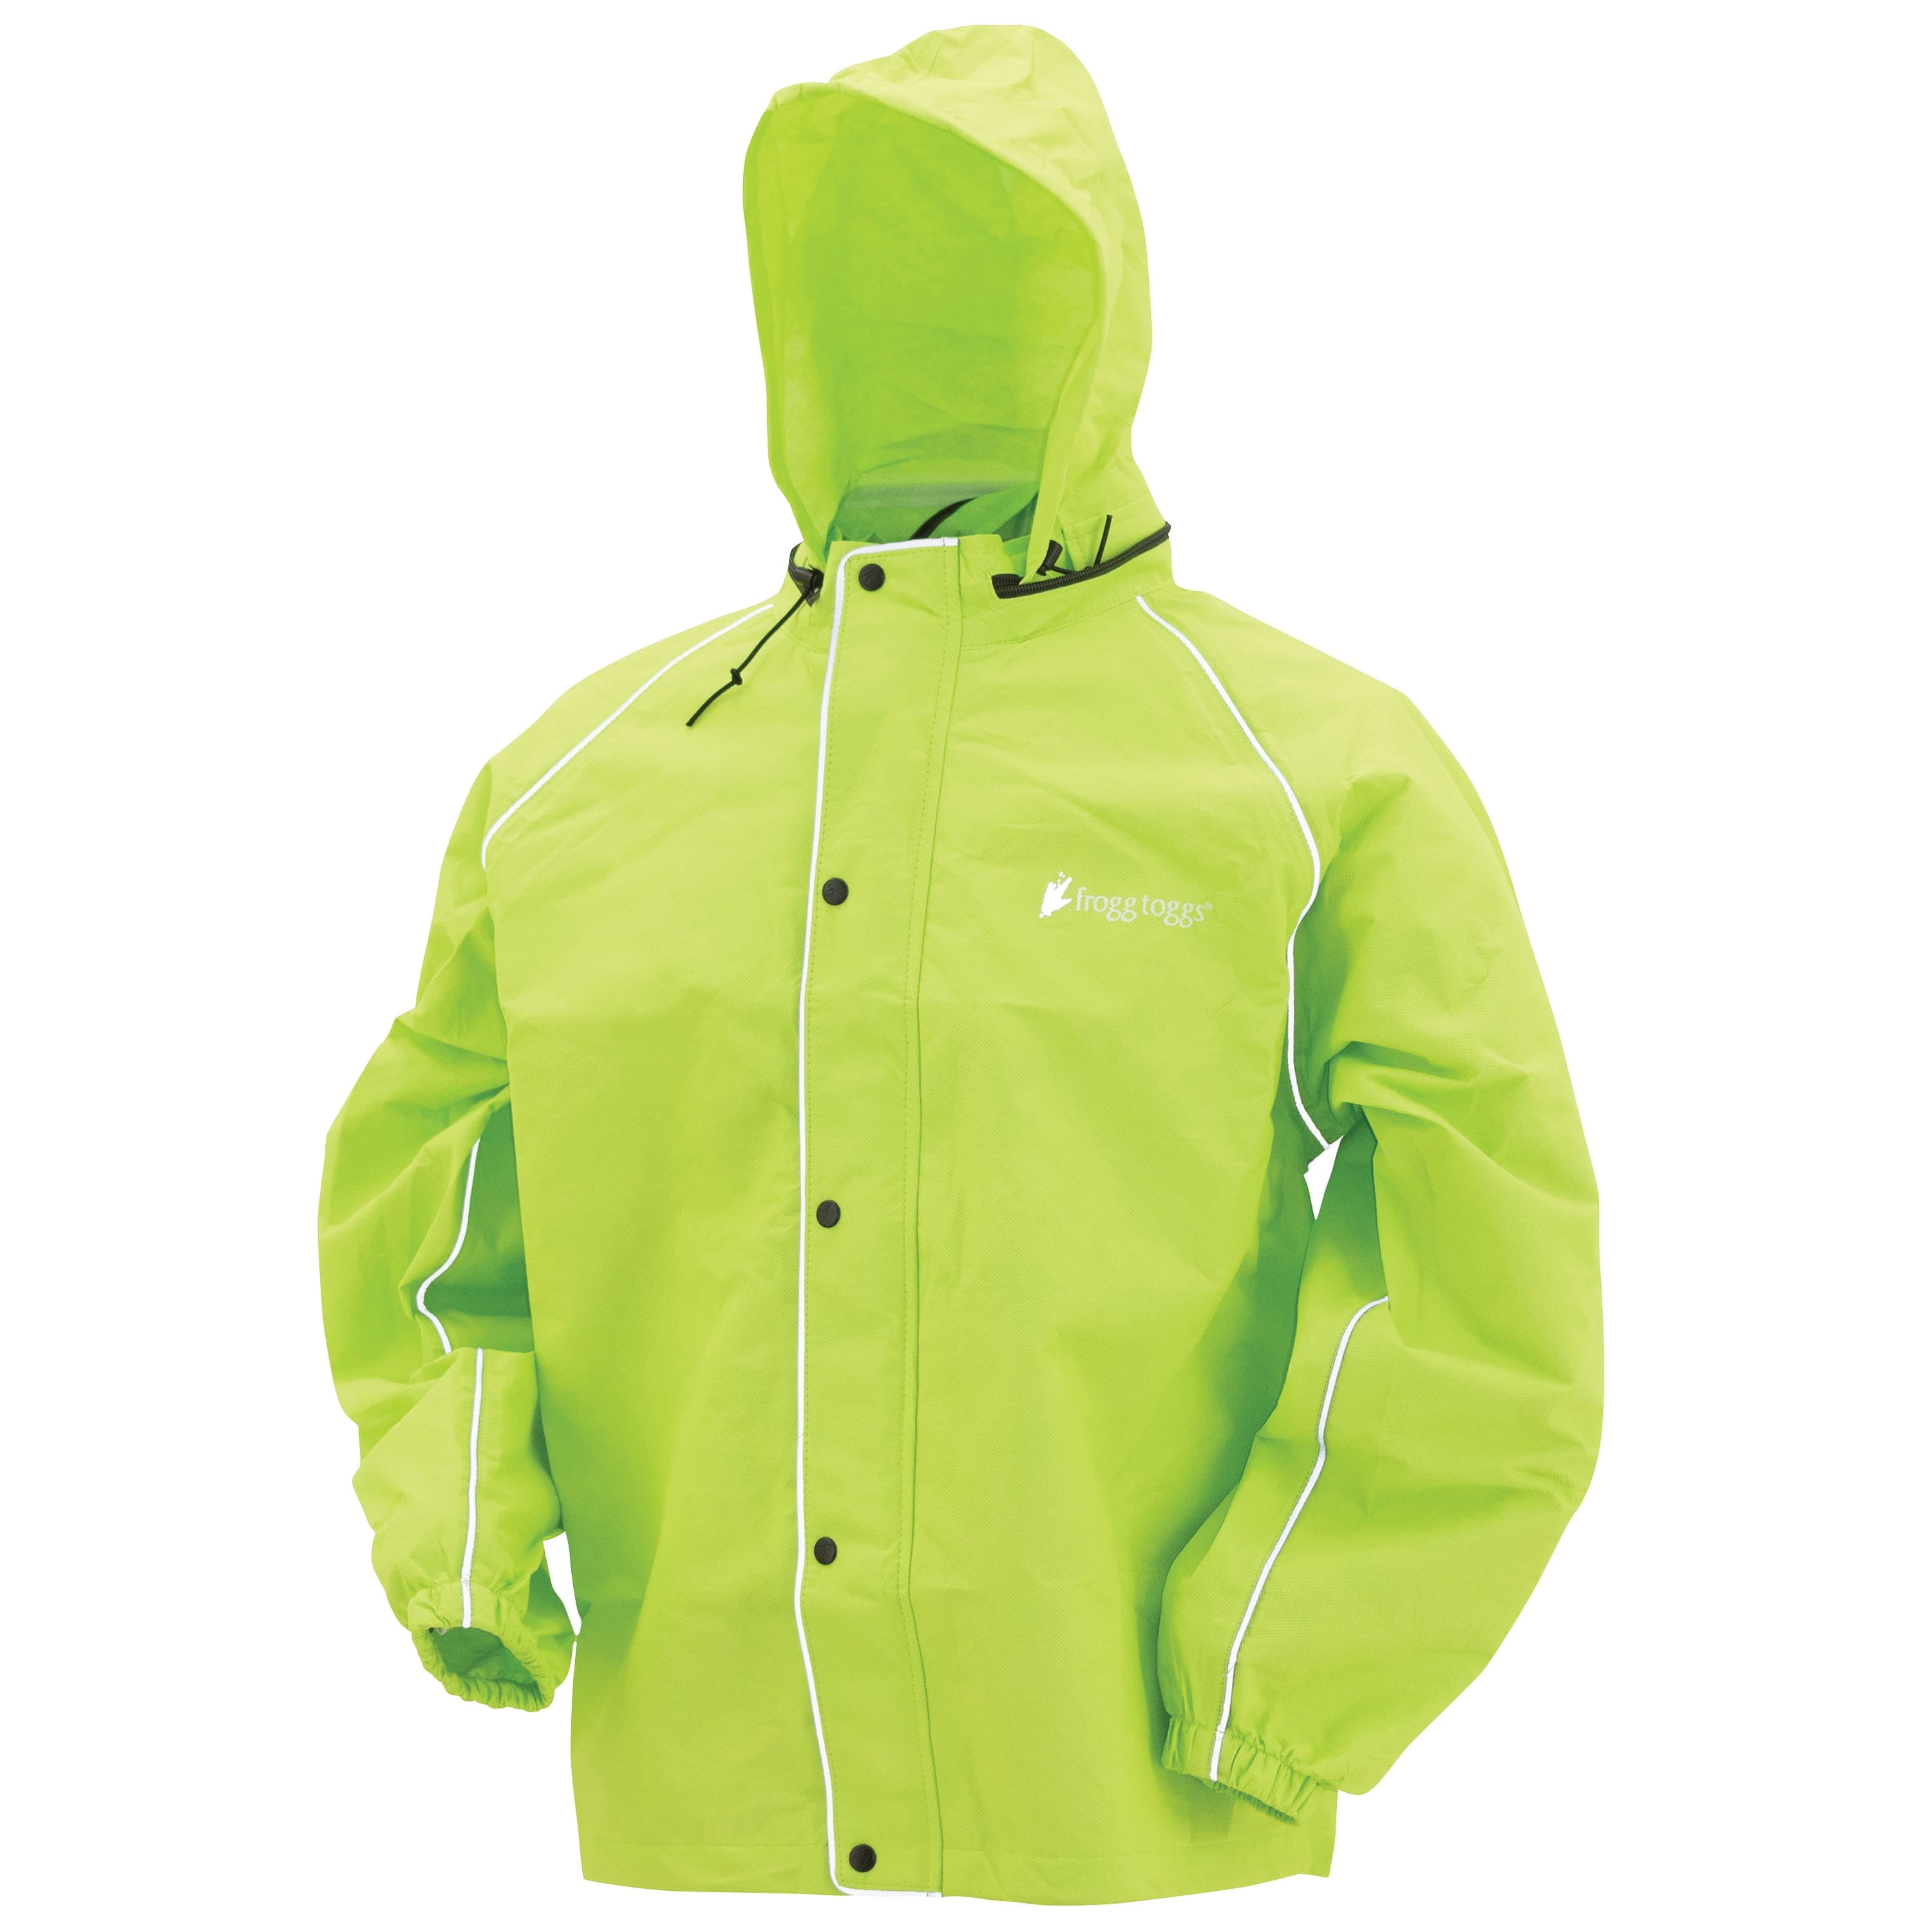 Men's Road Toad Reflective Jacket, Lime with Frogg Eyzz